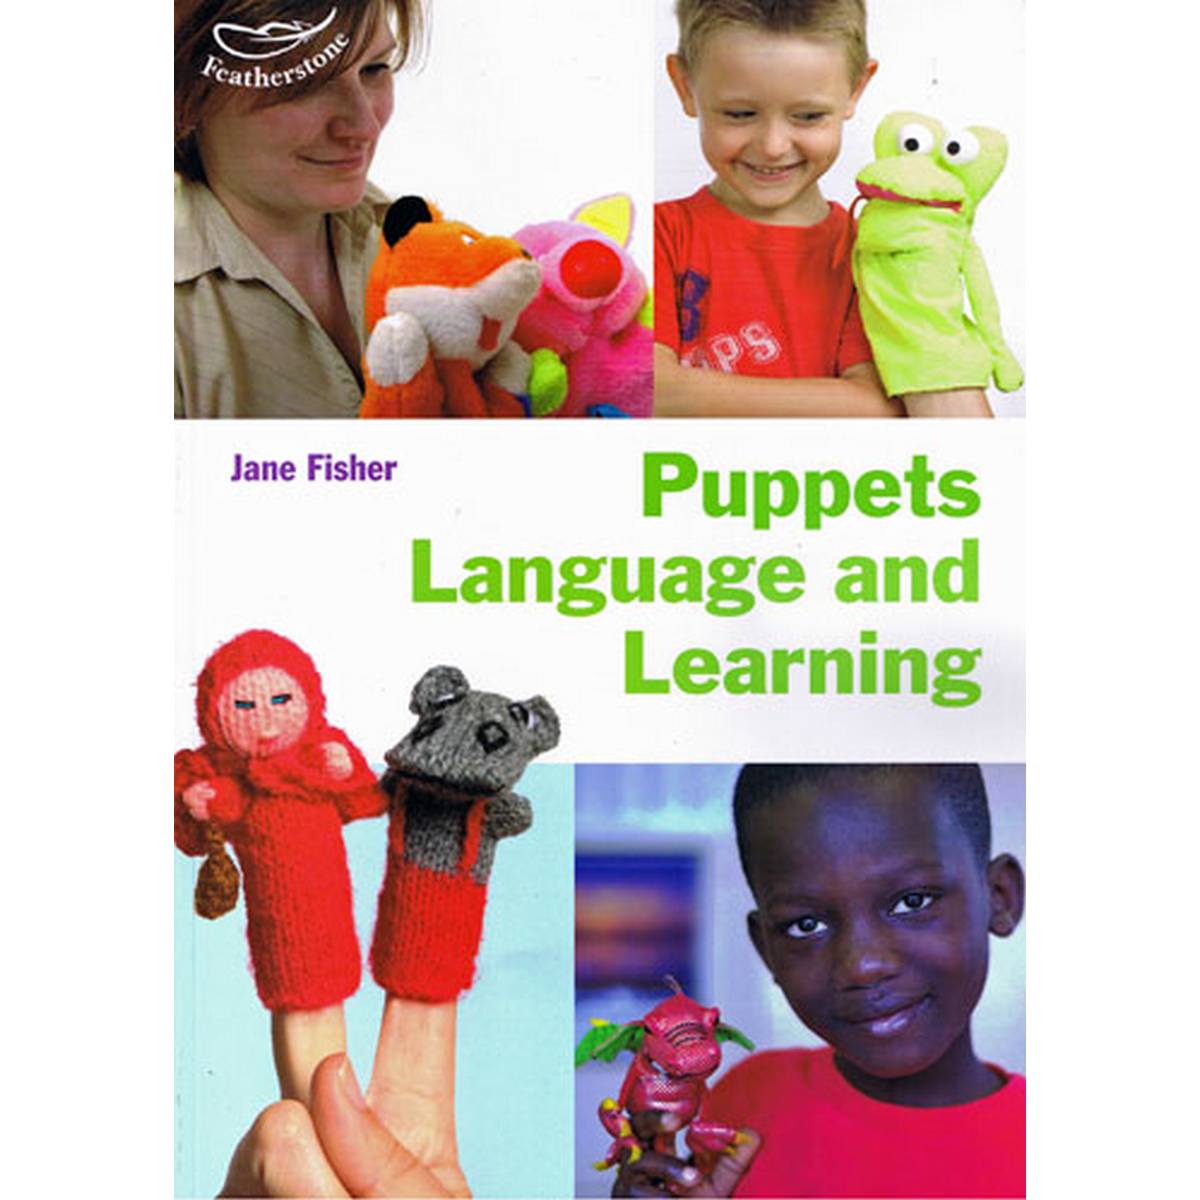 Puppets, Language and Learning